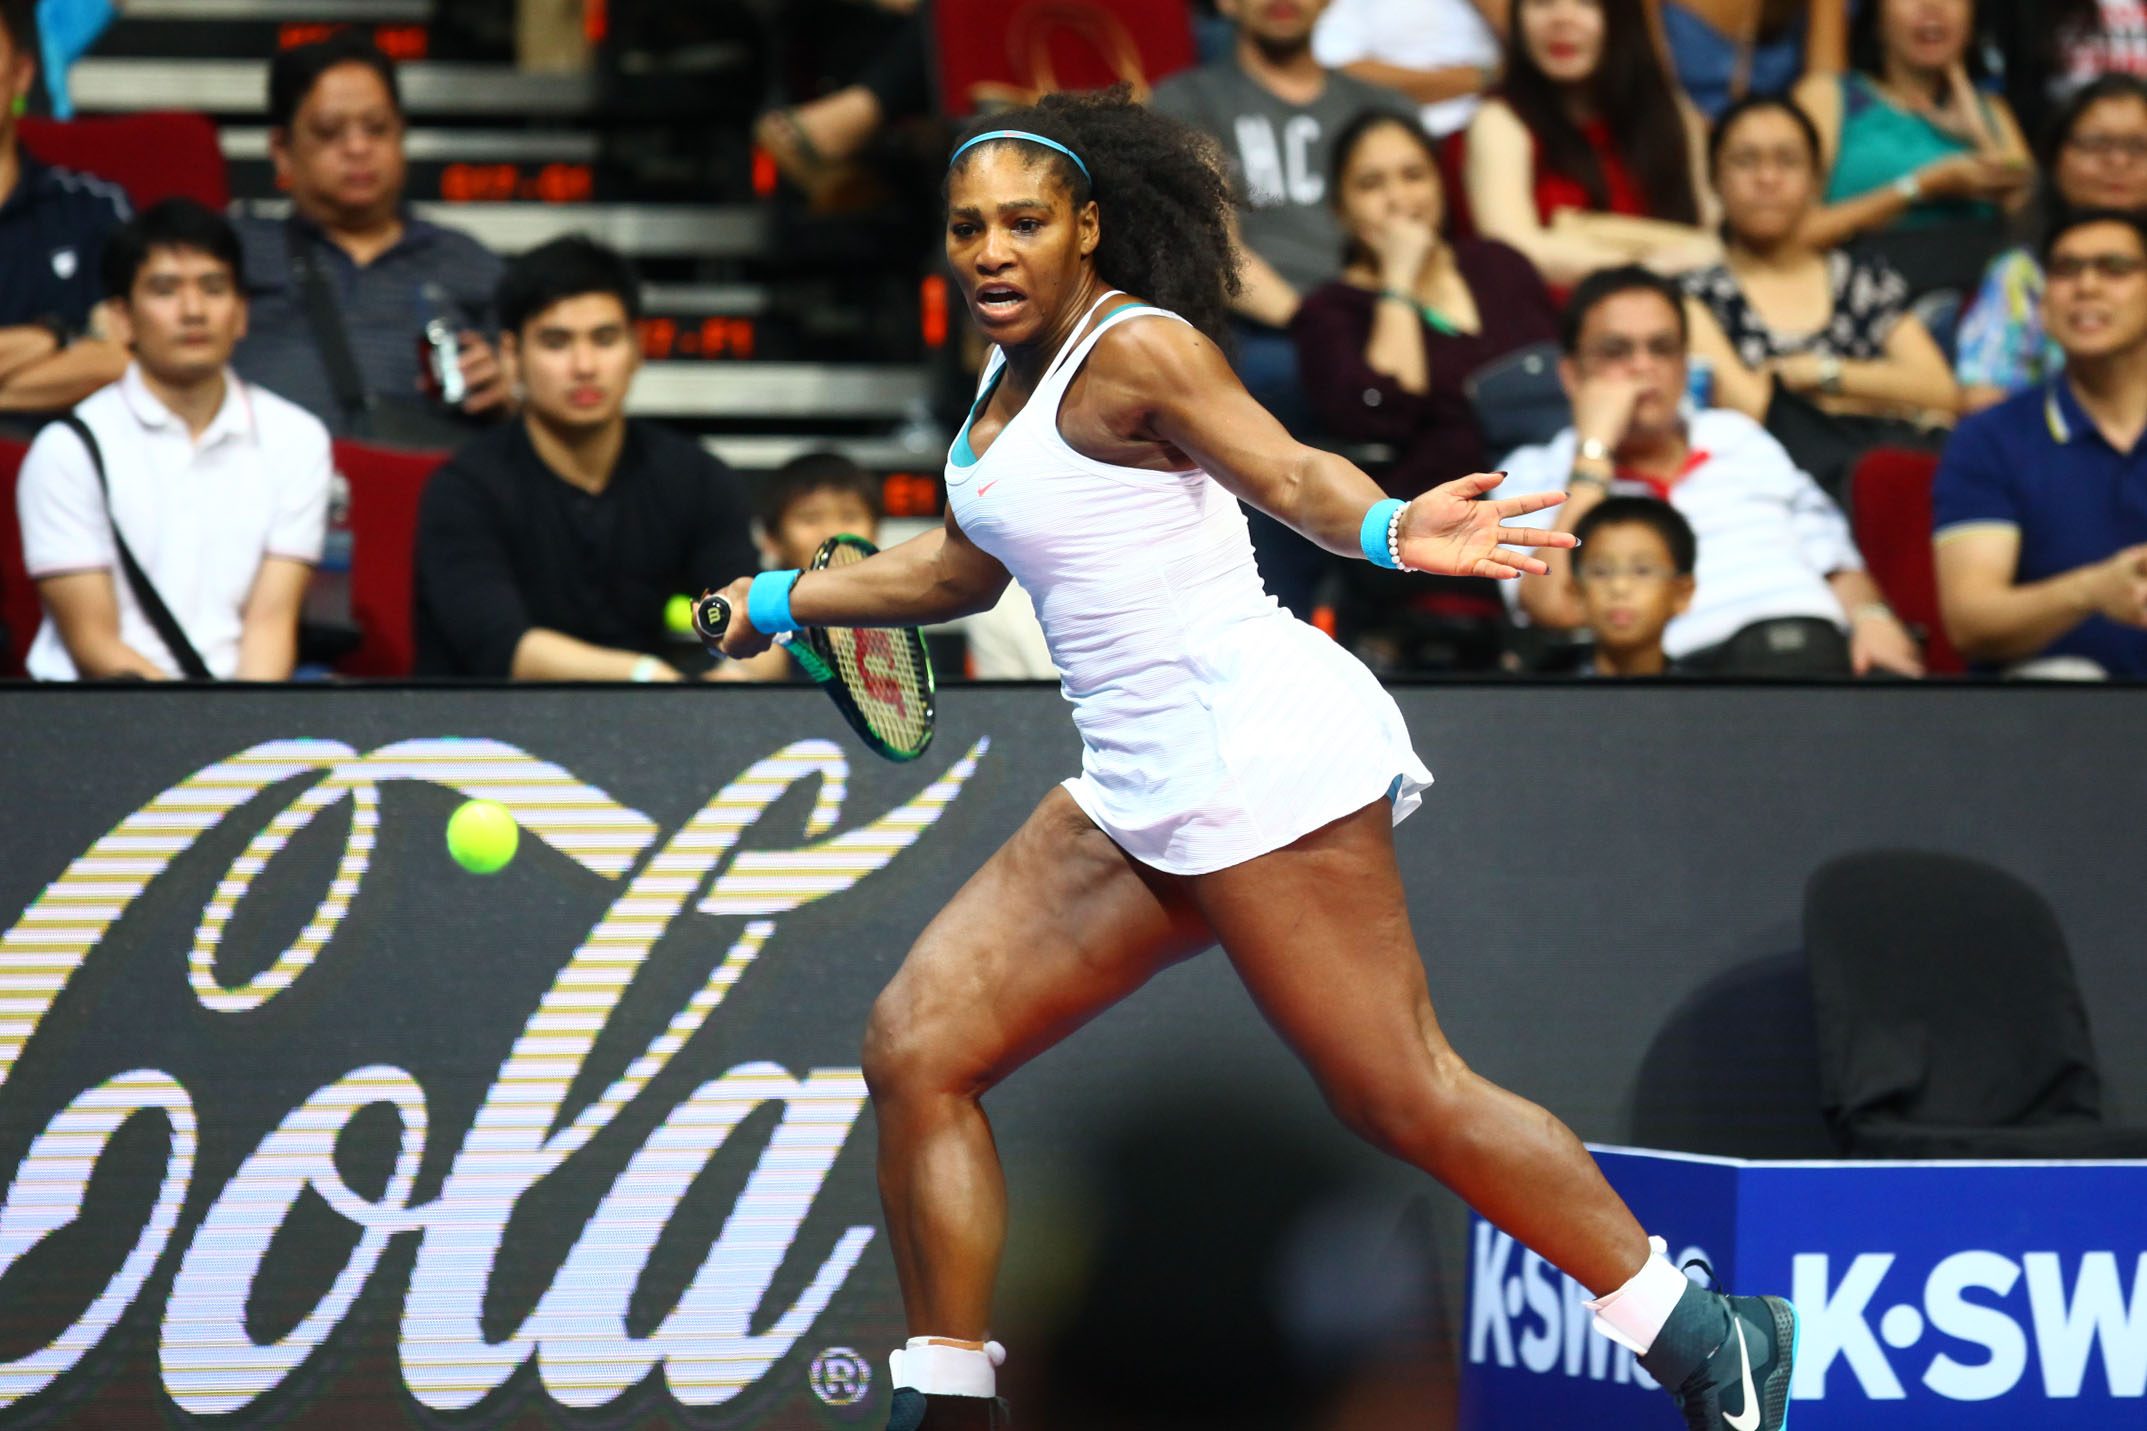 Serena Williams named Sportsperson of 2015 by Sports Illustrated